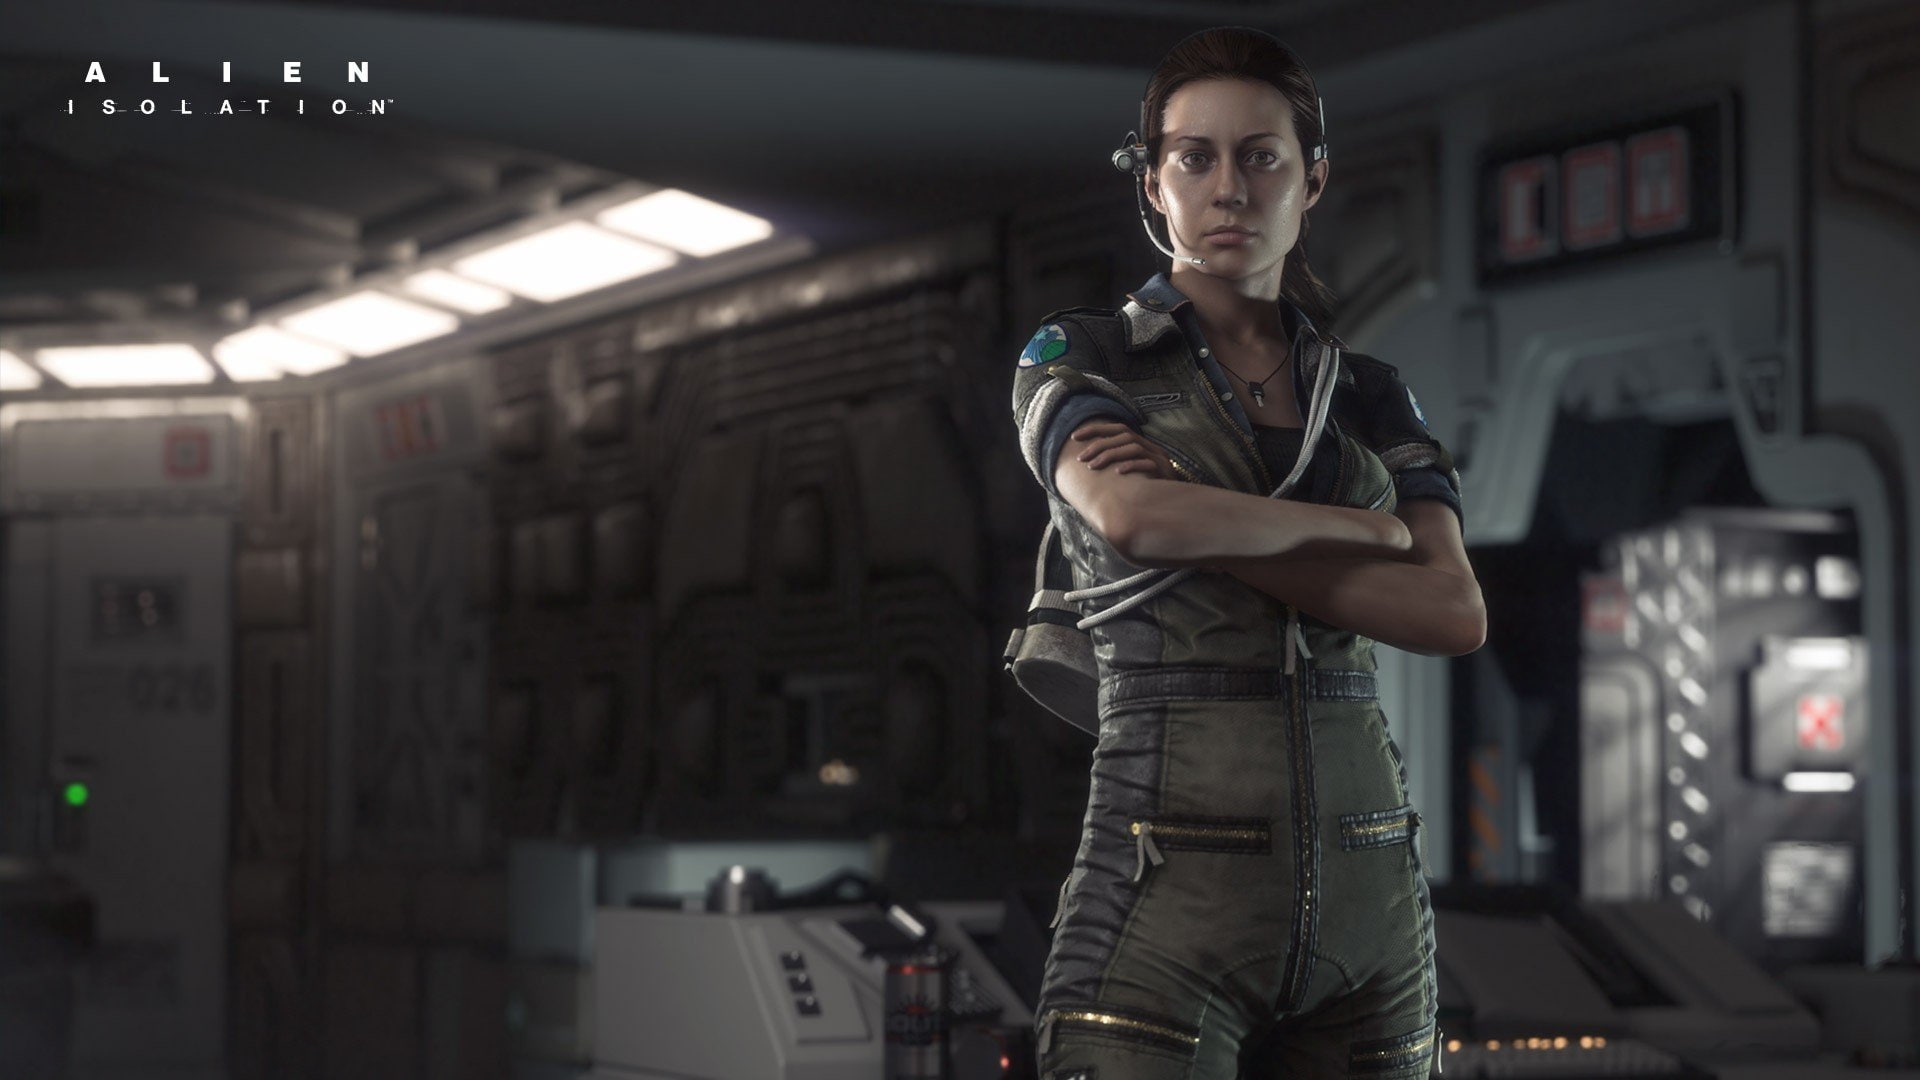 alien isolation pc gaming amanda ripley, one person, adult